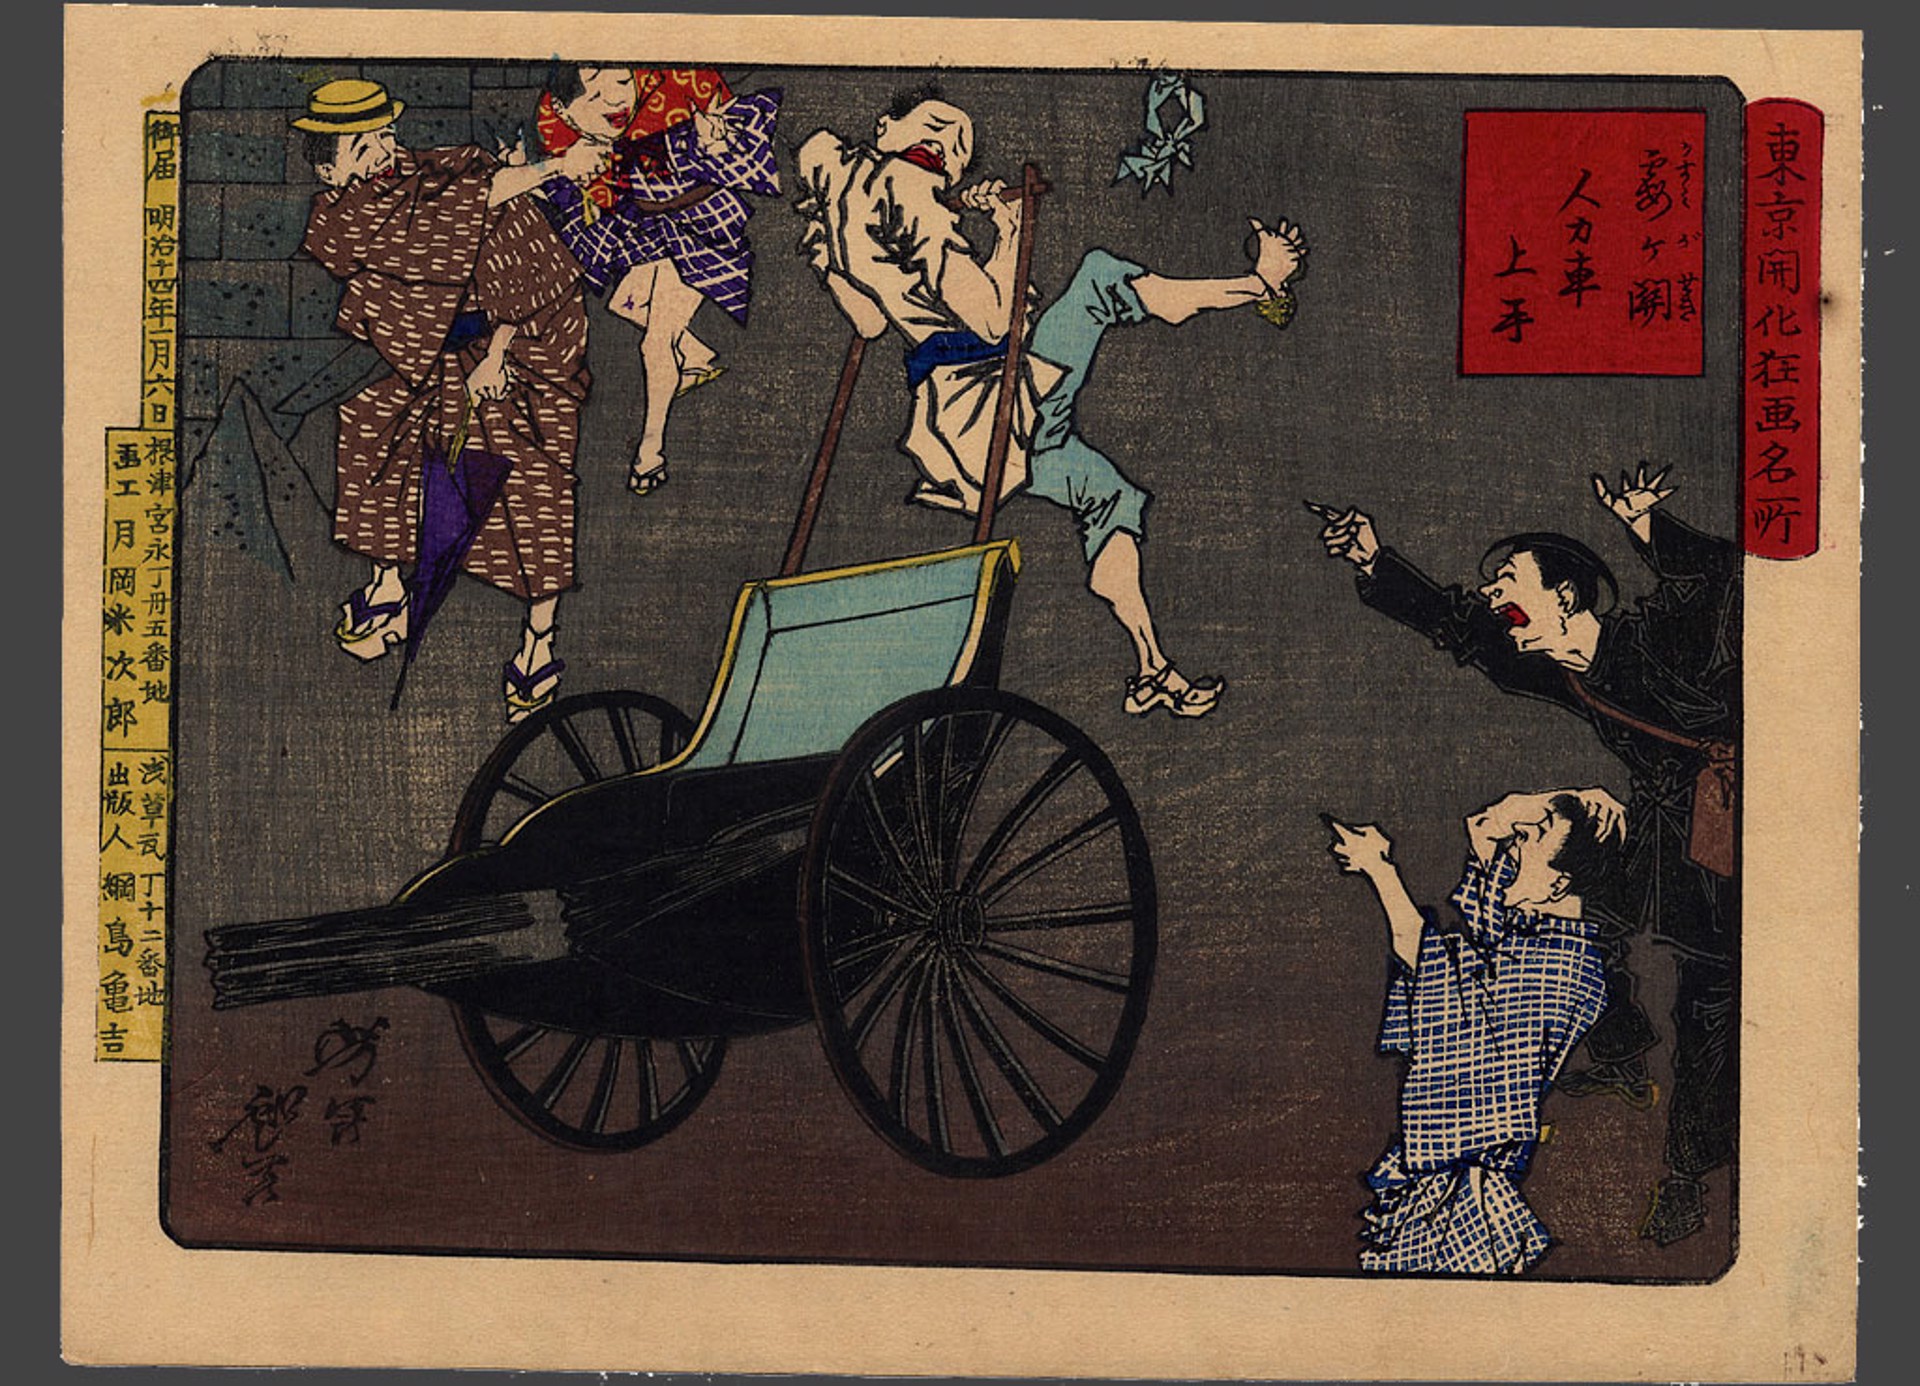 A skillful rickshaw driver at Kasumigaseki Comic pictures of famous places amid the civiization of Tokyo by Yoshitoshi